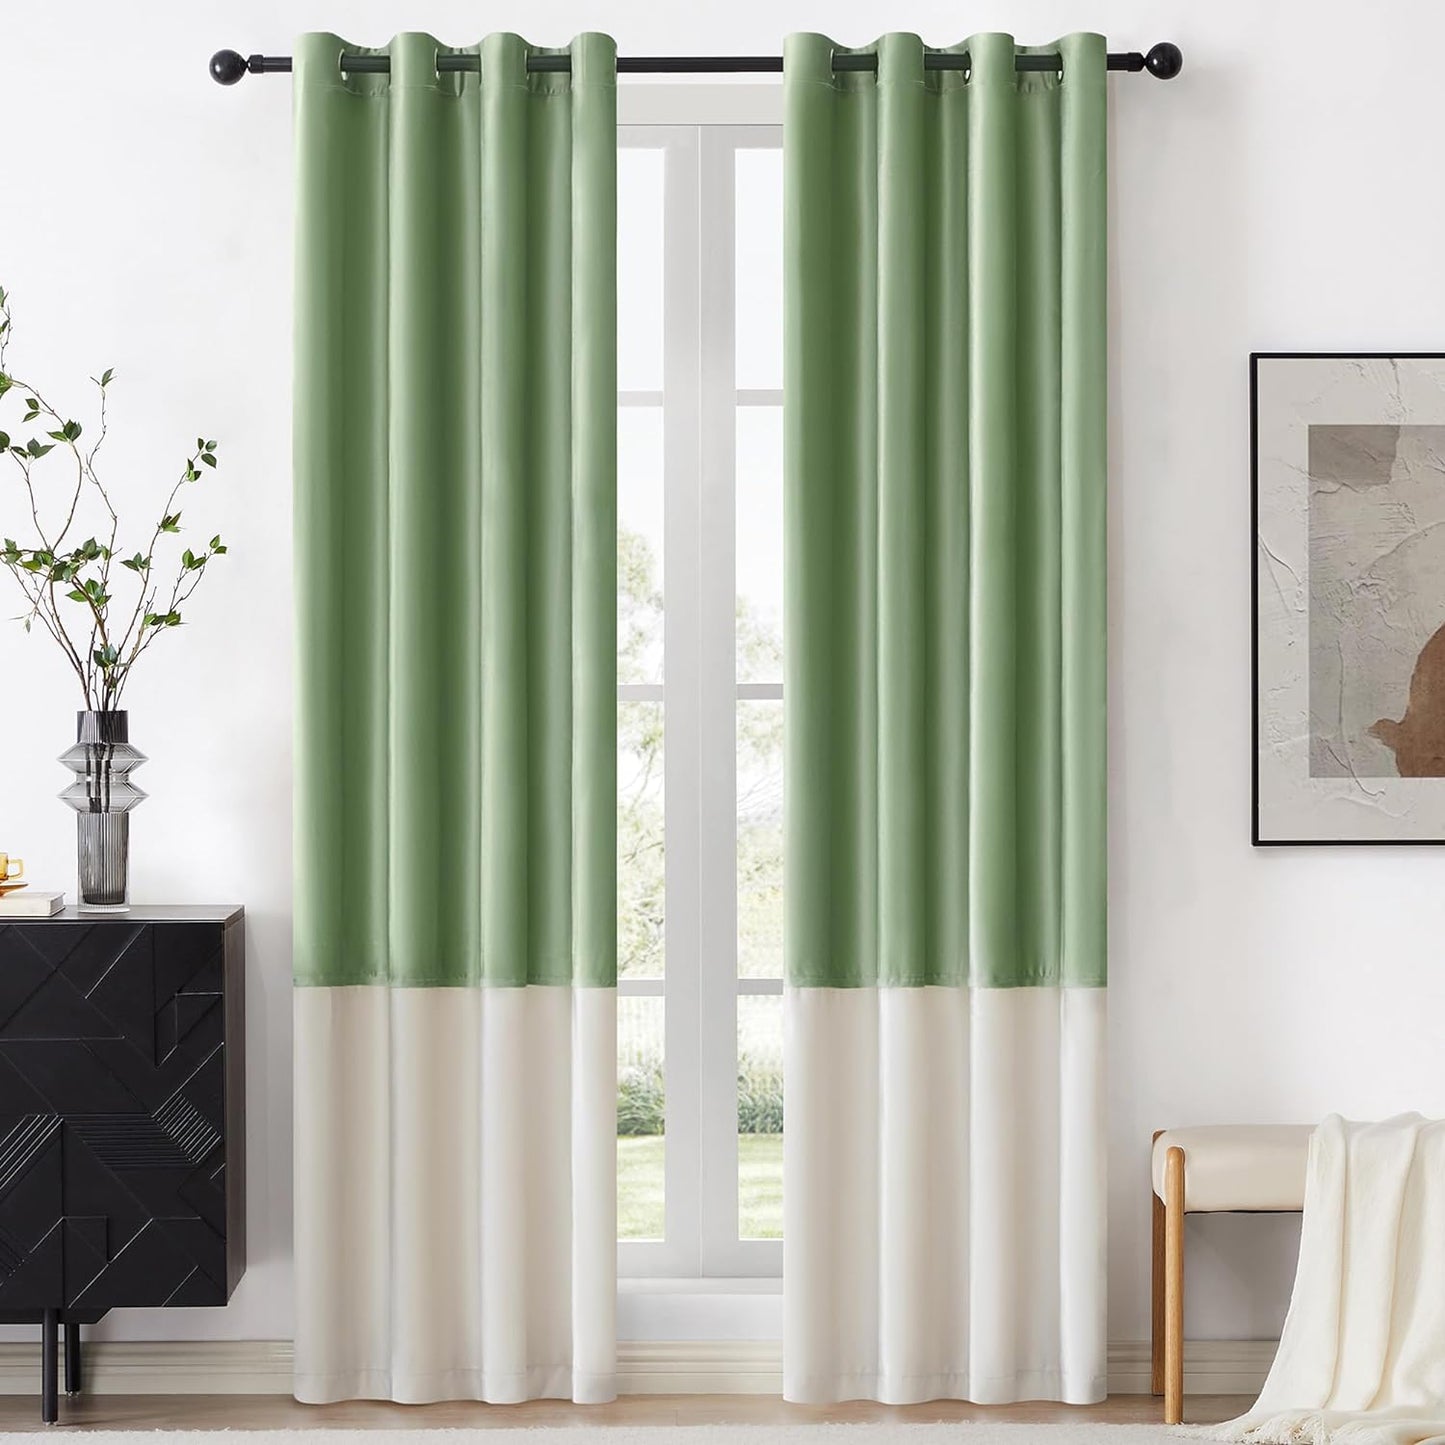 BULBUL Black Gold Color Block Window Curtains Panels 84 Inches Long Velvet Farmhouse Drapes for Bedroom Living Room Darkening Treatment with Grommet Set of Black Gold  BULBUL Sage Green  Cream 52"W X 84"L 